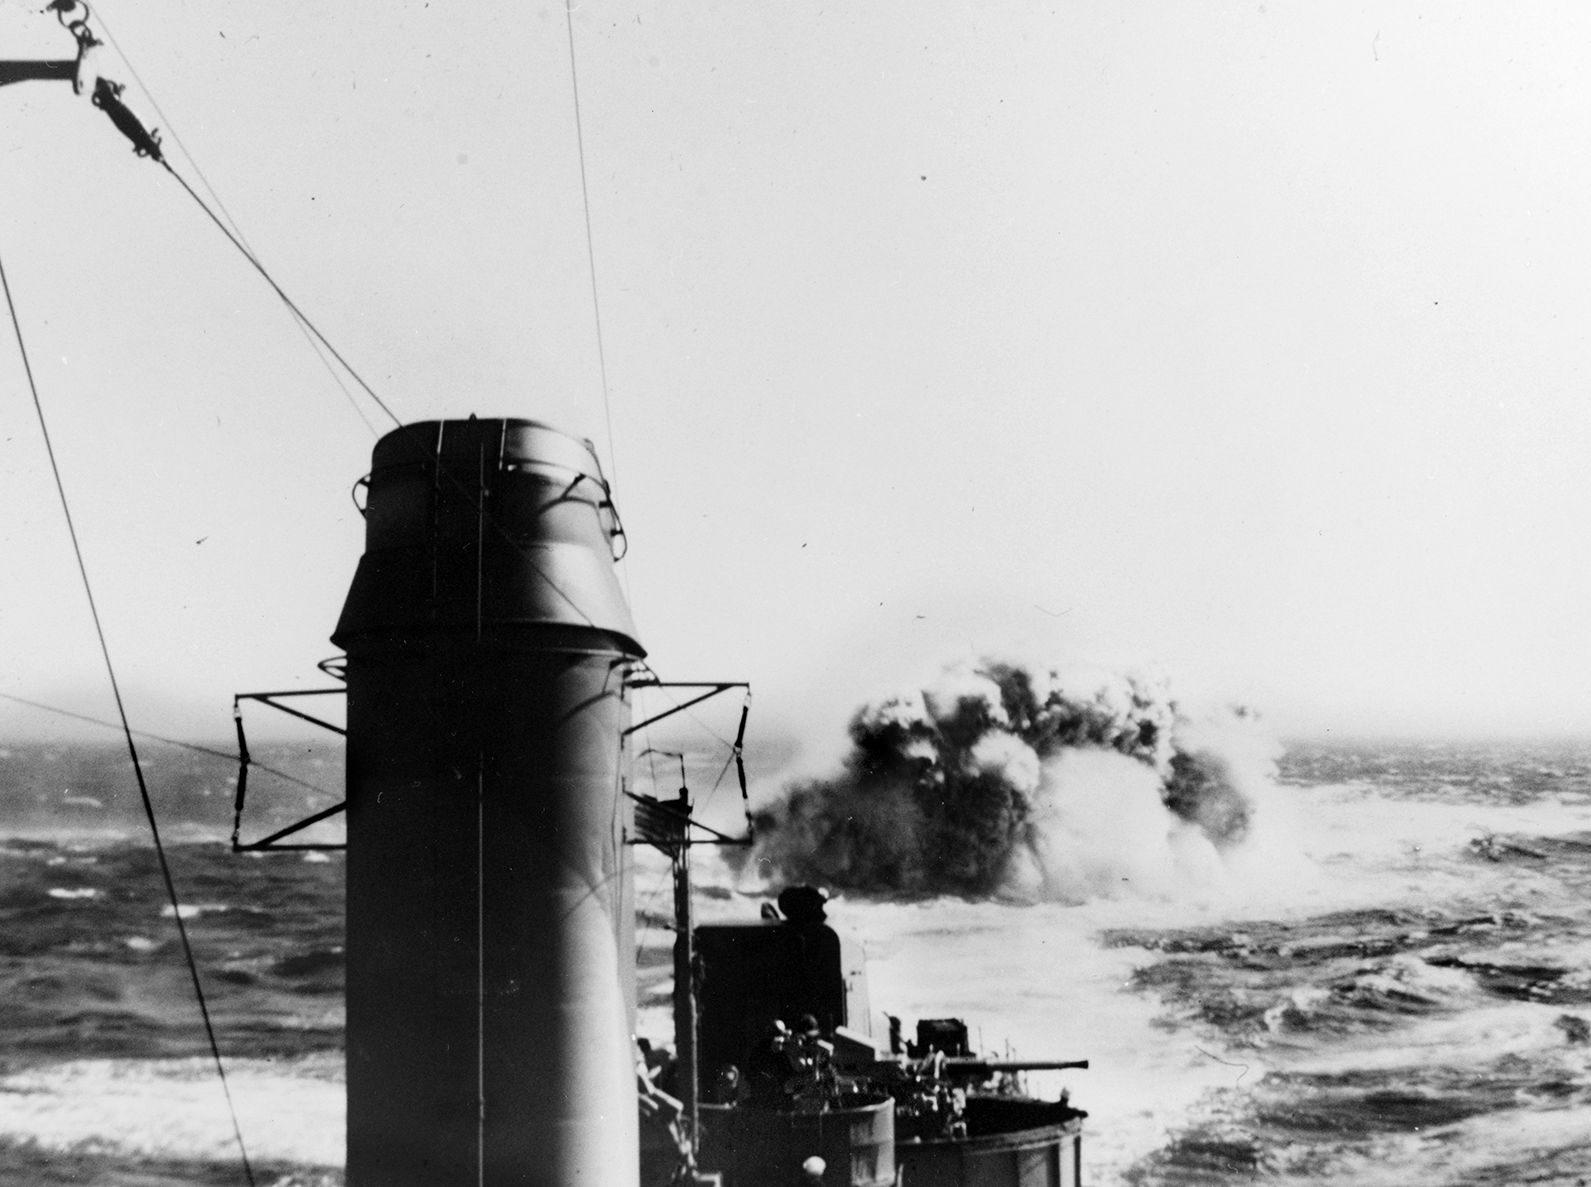 A depth charge explodes astern of the destroyer USS Meade, one of the American warships of Destroyer Squadron 14 that sank the Japanese submarine I-35 near Tarawa atoll in November 1943. Both Meade and the destroyer Frazier picked up survivors after the sinking. 